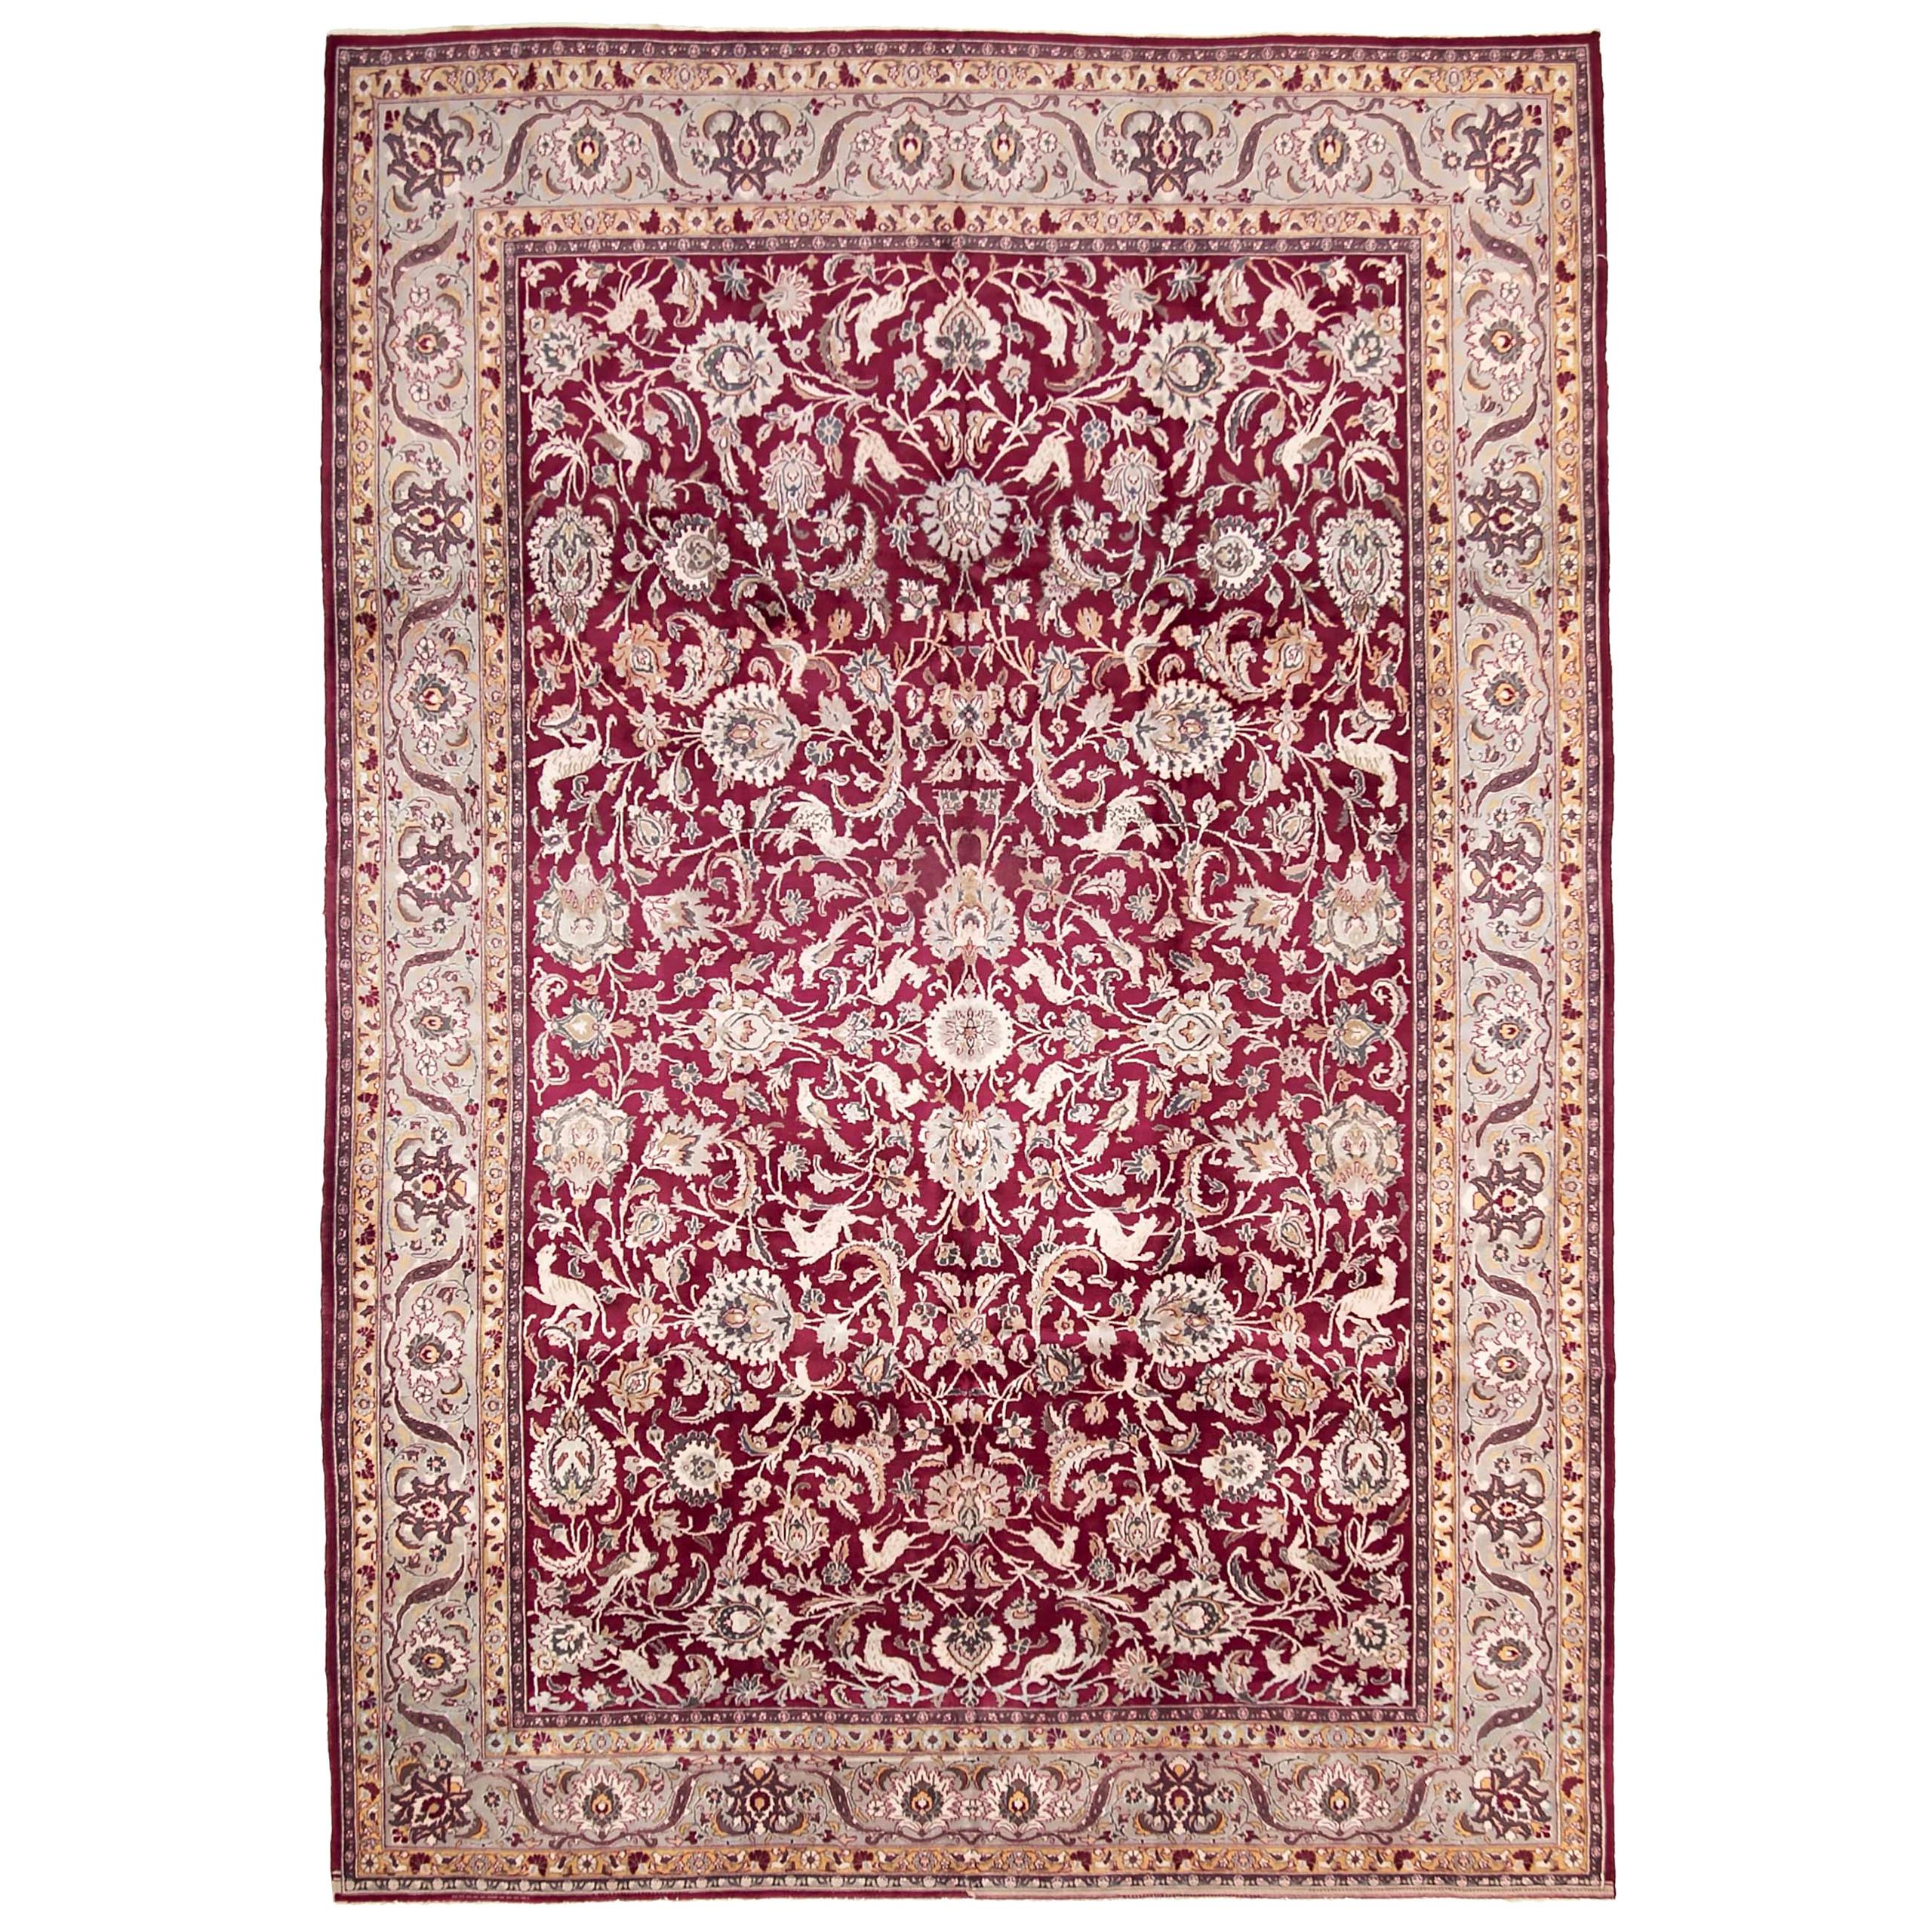 Antique Persian Tabriz Rug with Floral Details on Red Field